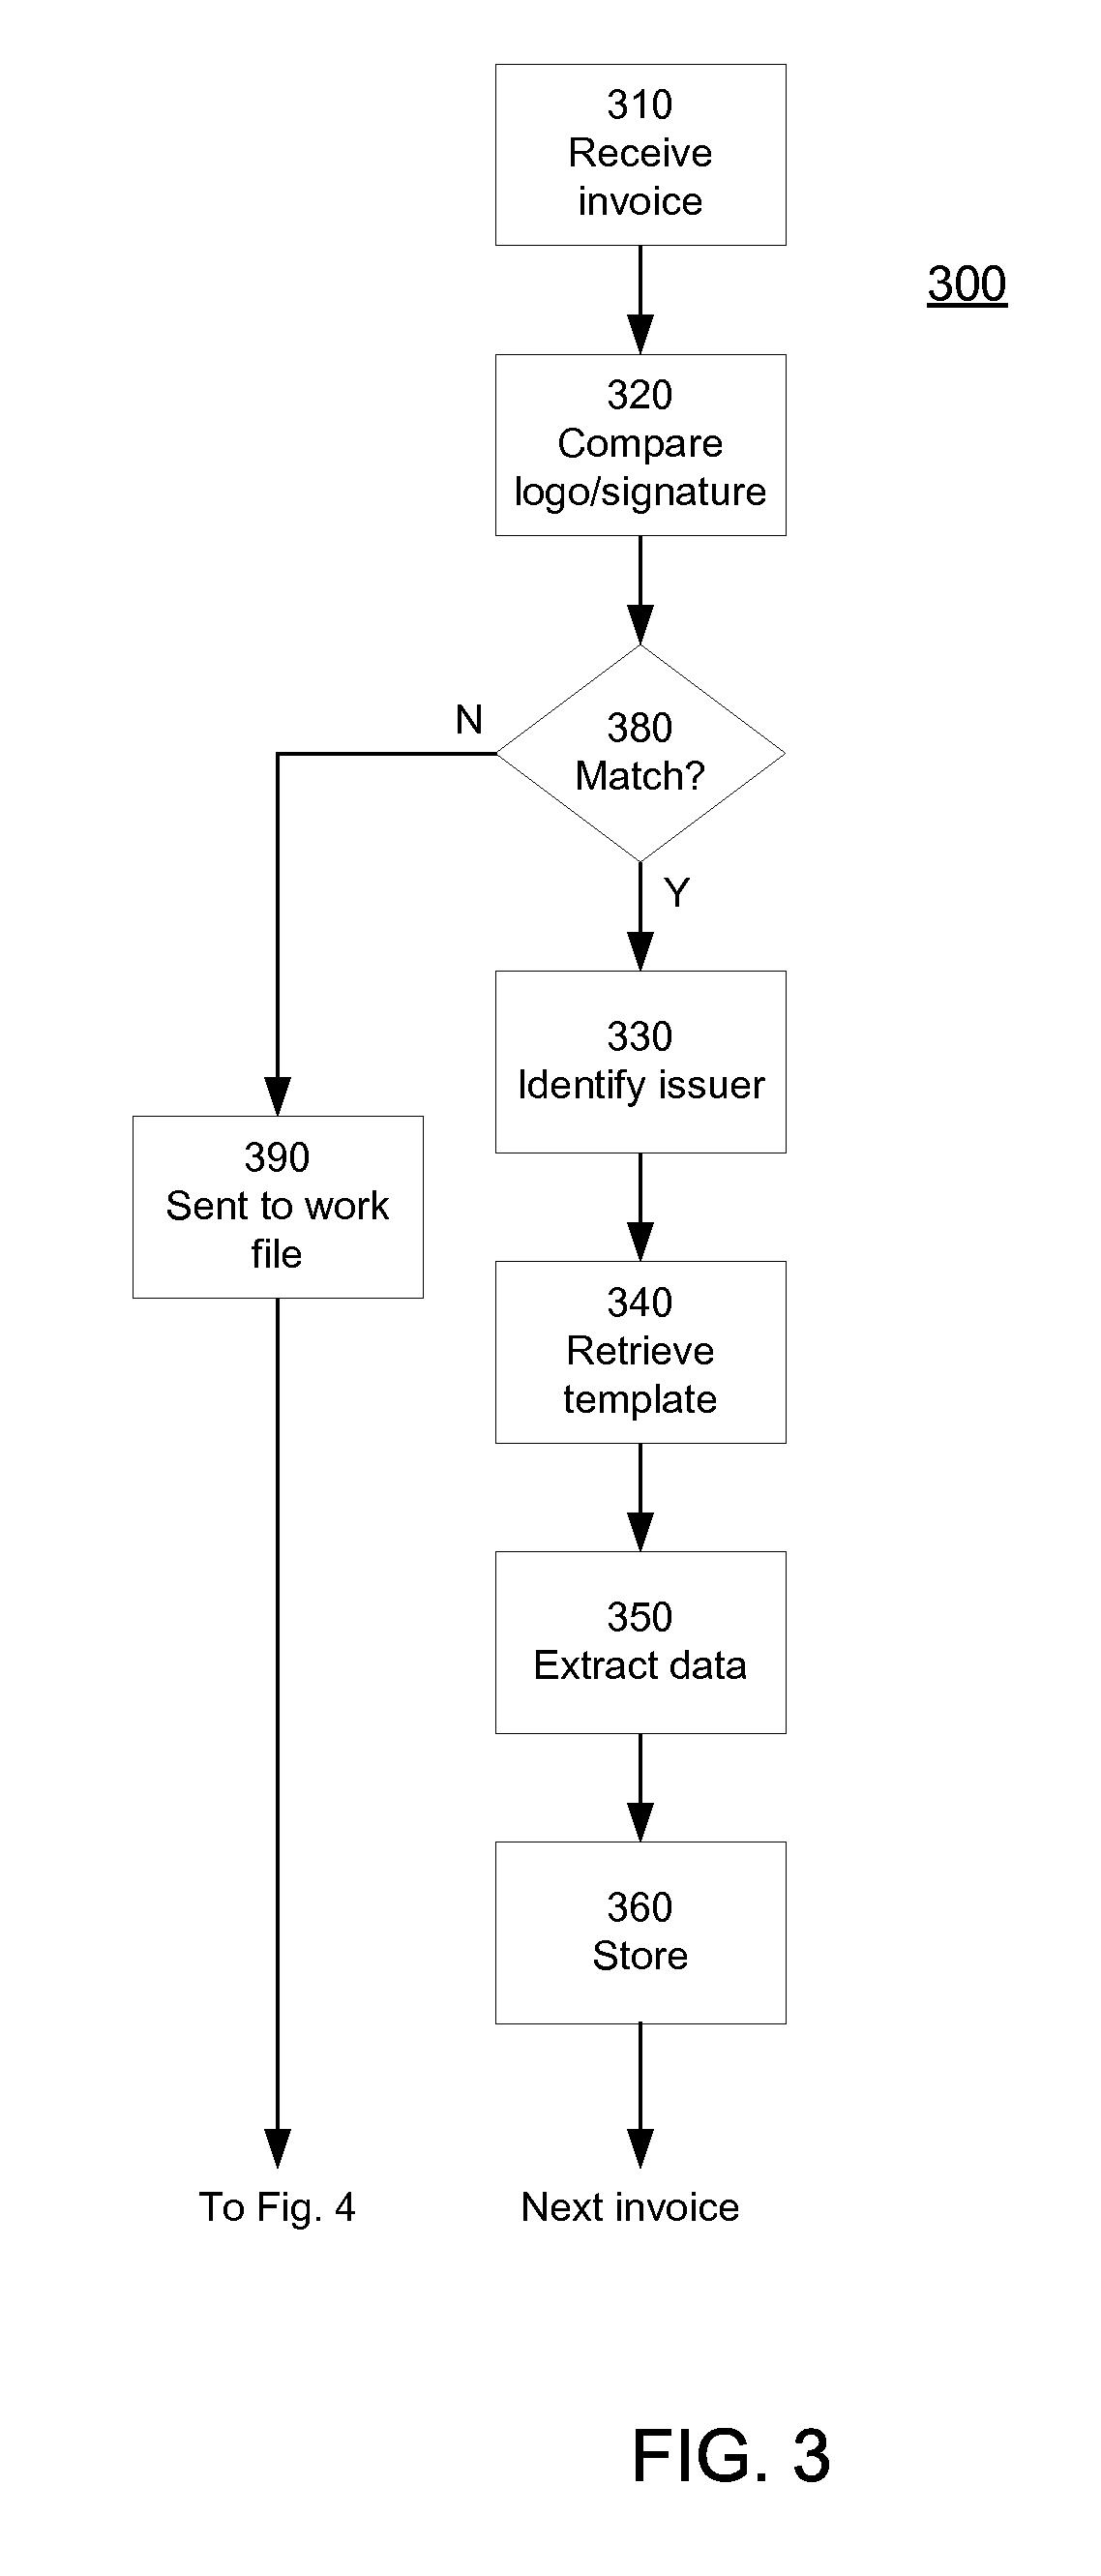 Enhanced Automated Capture of Invoices into an Electronic Payment System